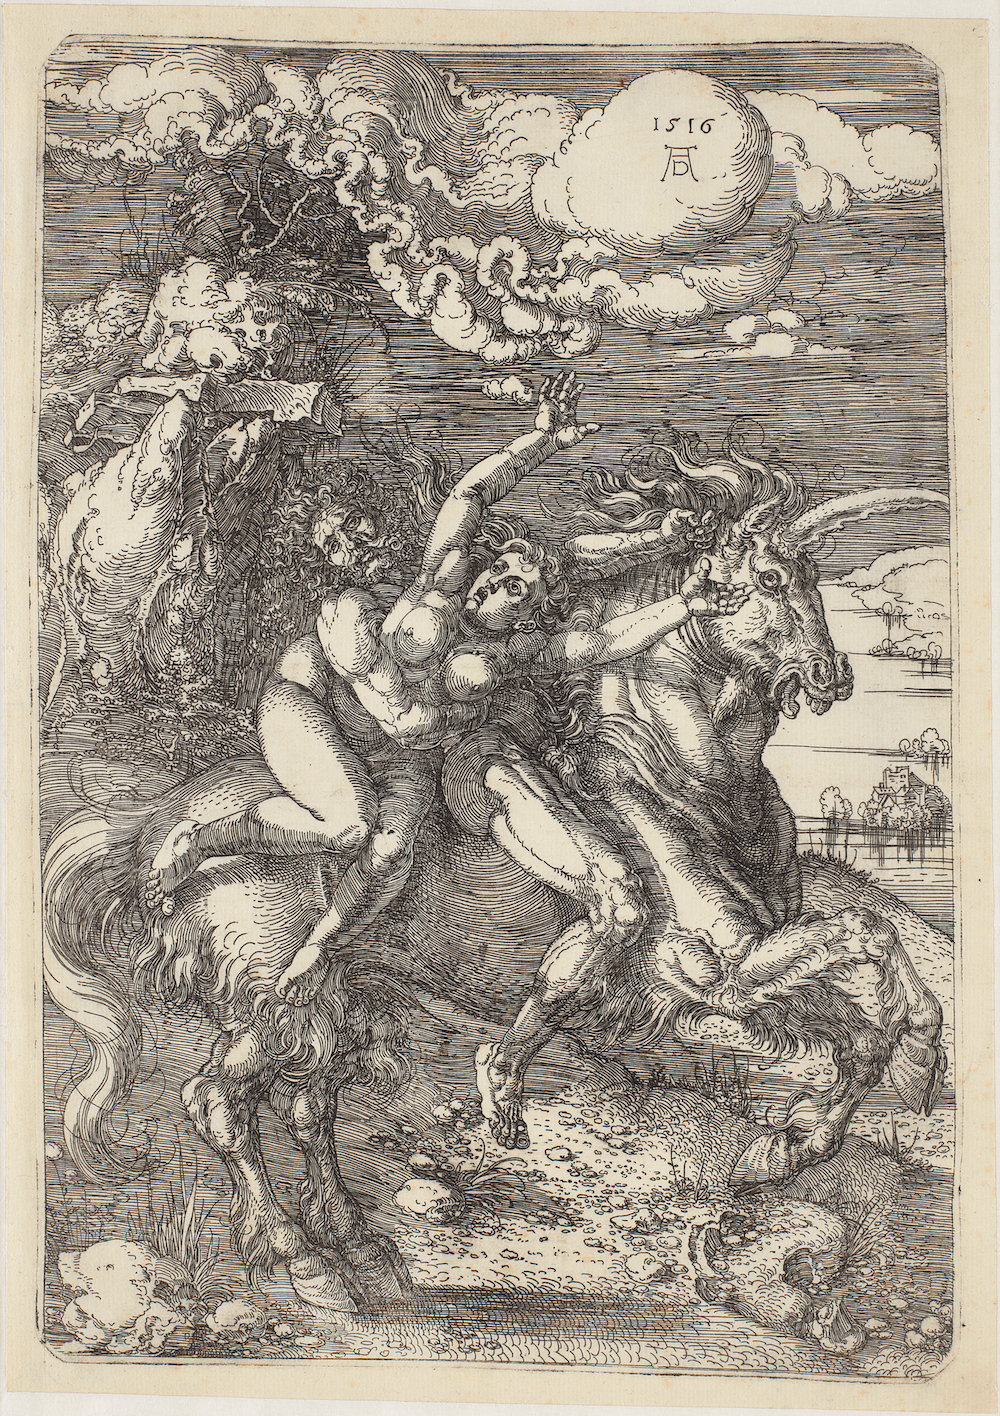 Abduction on a Unicorn by Albrecht Dürer - 1516 - 393 x 230 mm Statens Museum for Kunst